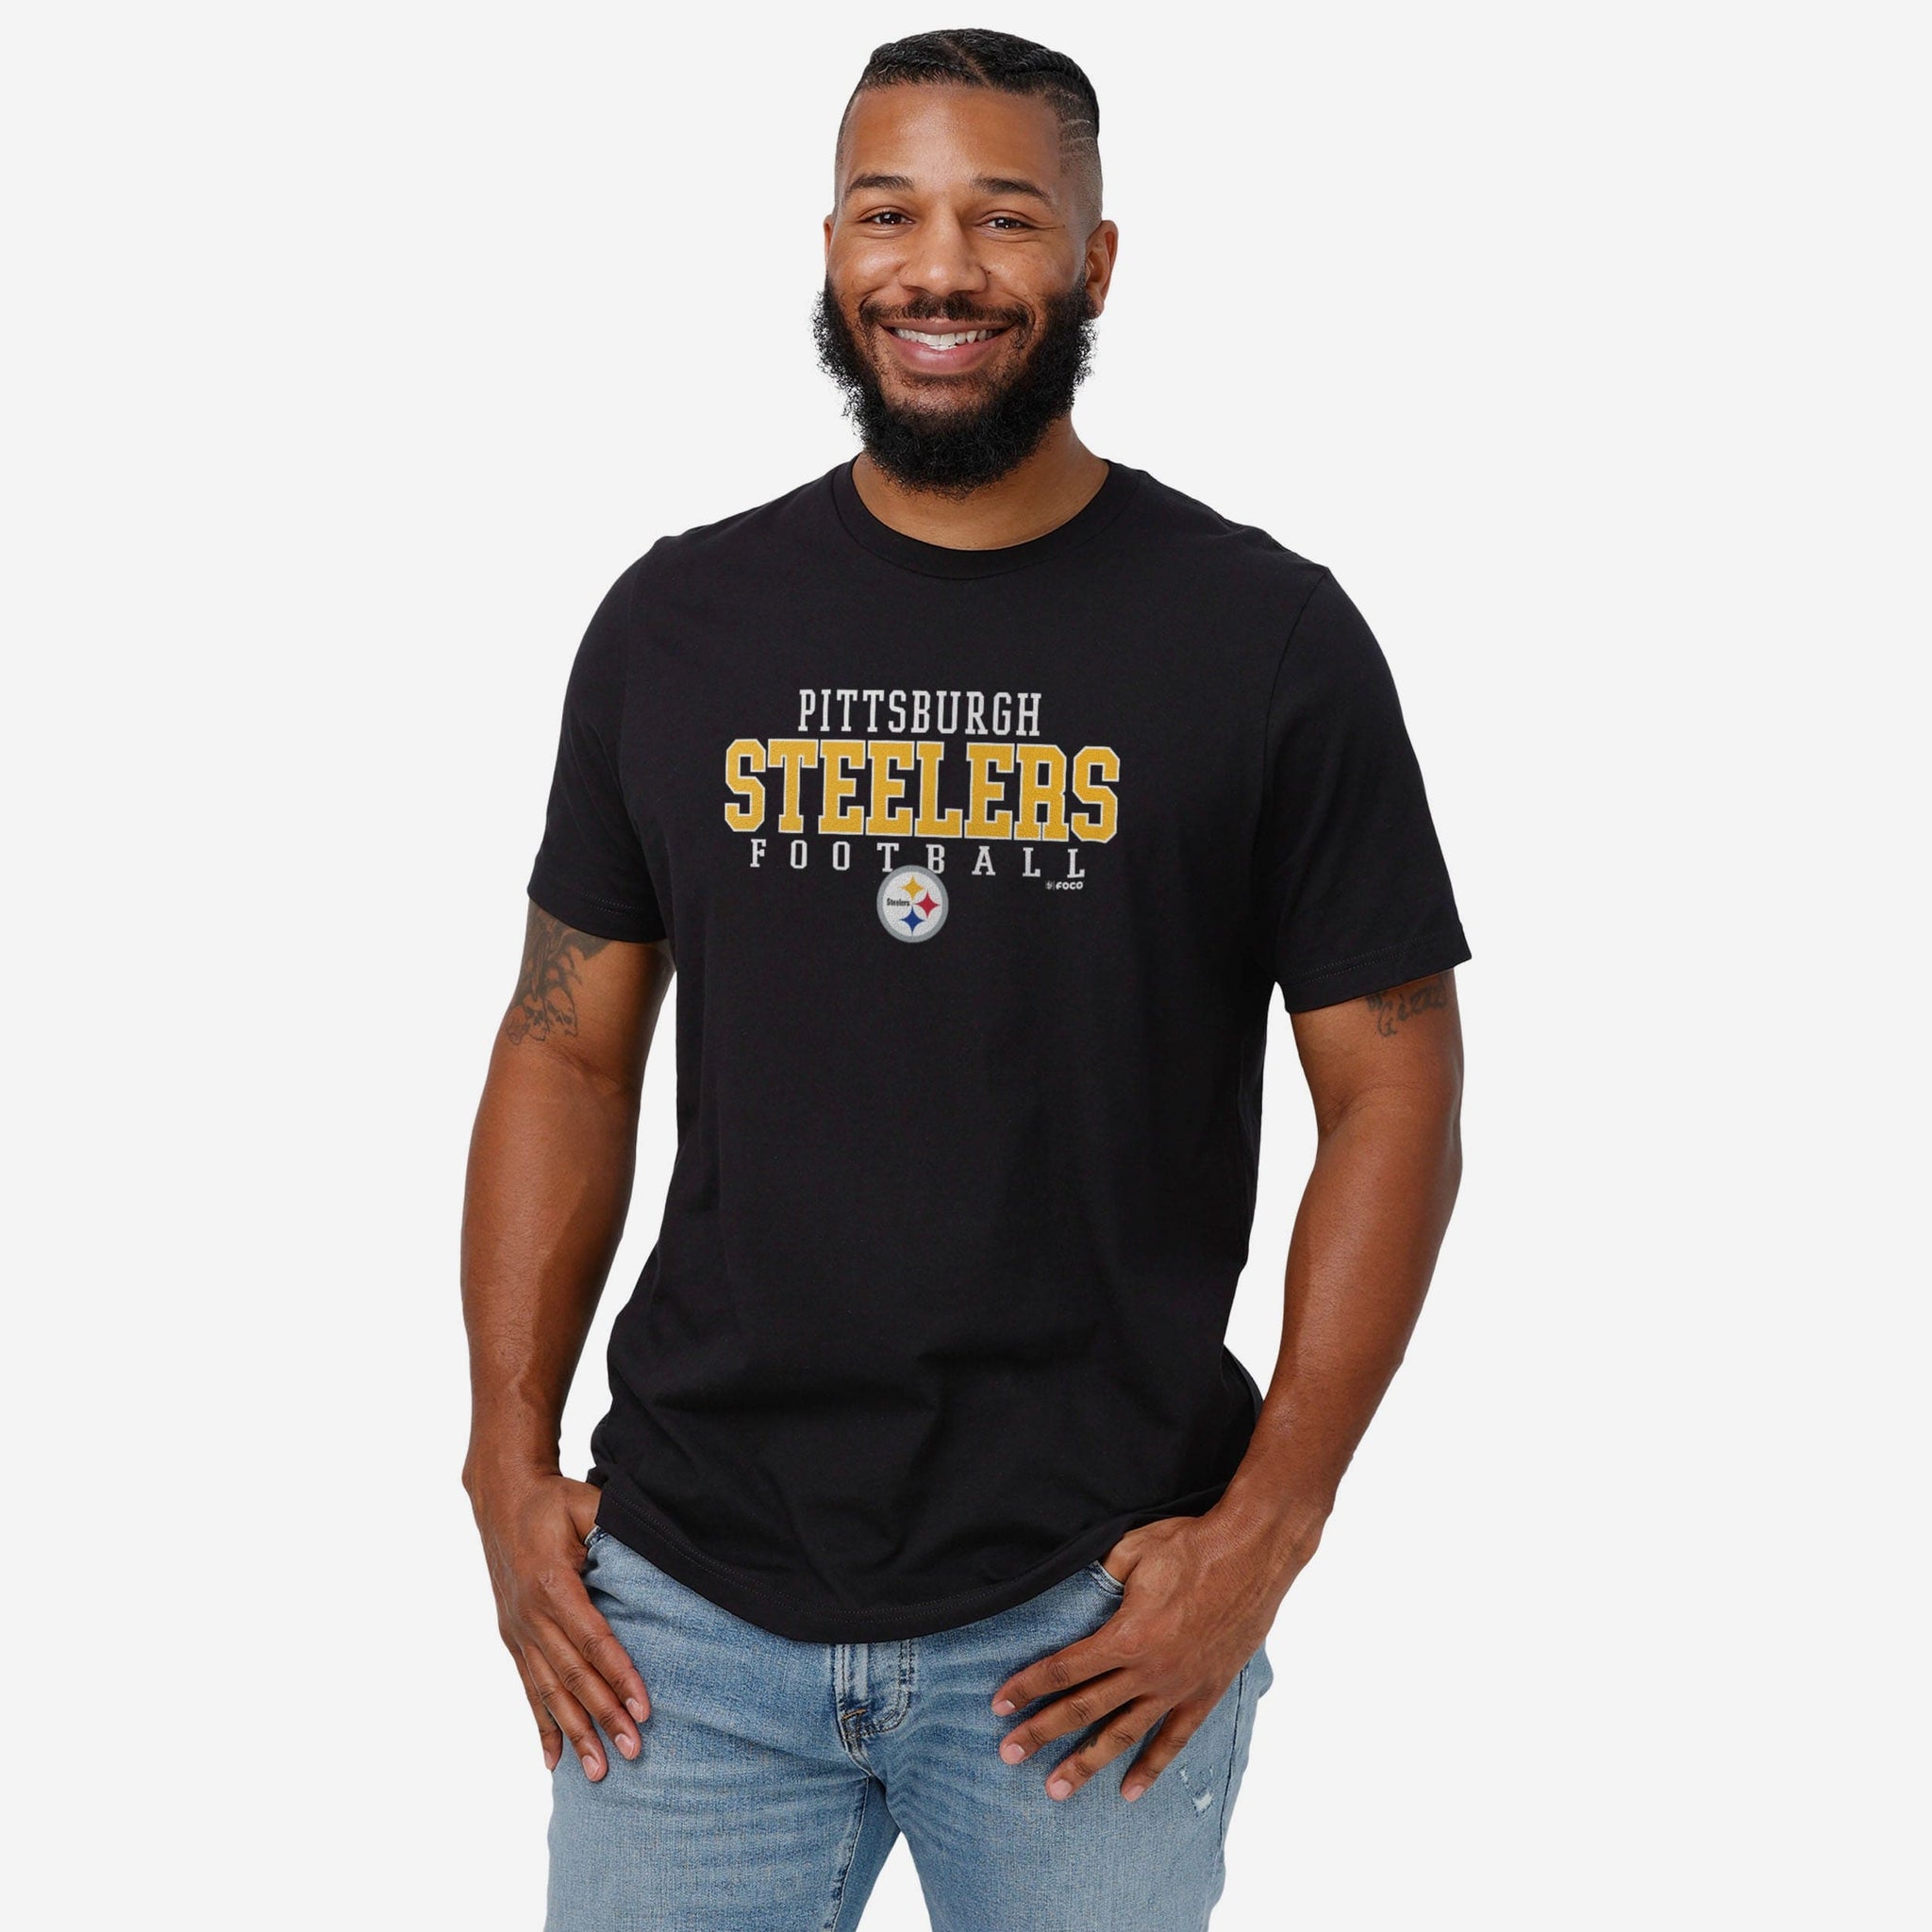 Pittsburgh Steelers And Kentucky Wildcats Superman Logo t-shirt by